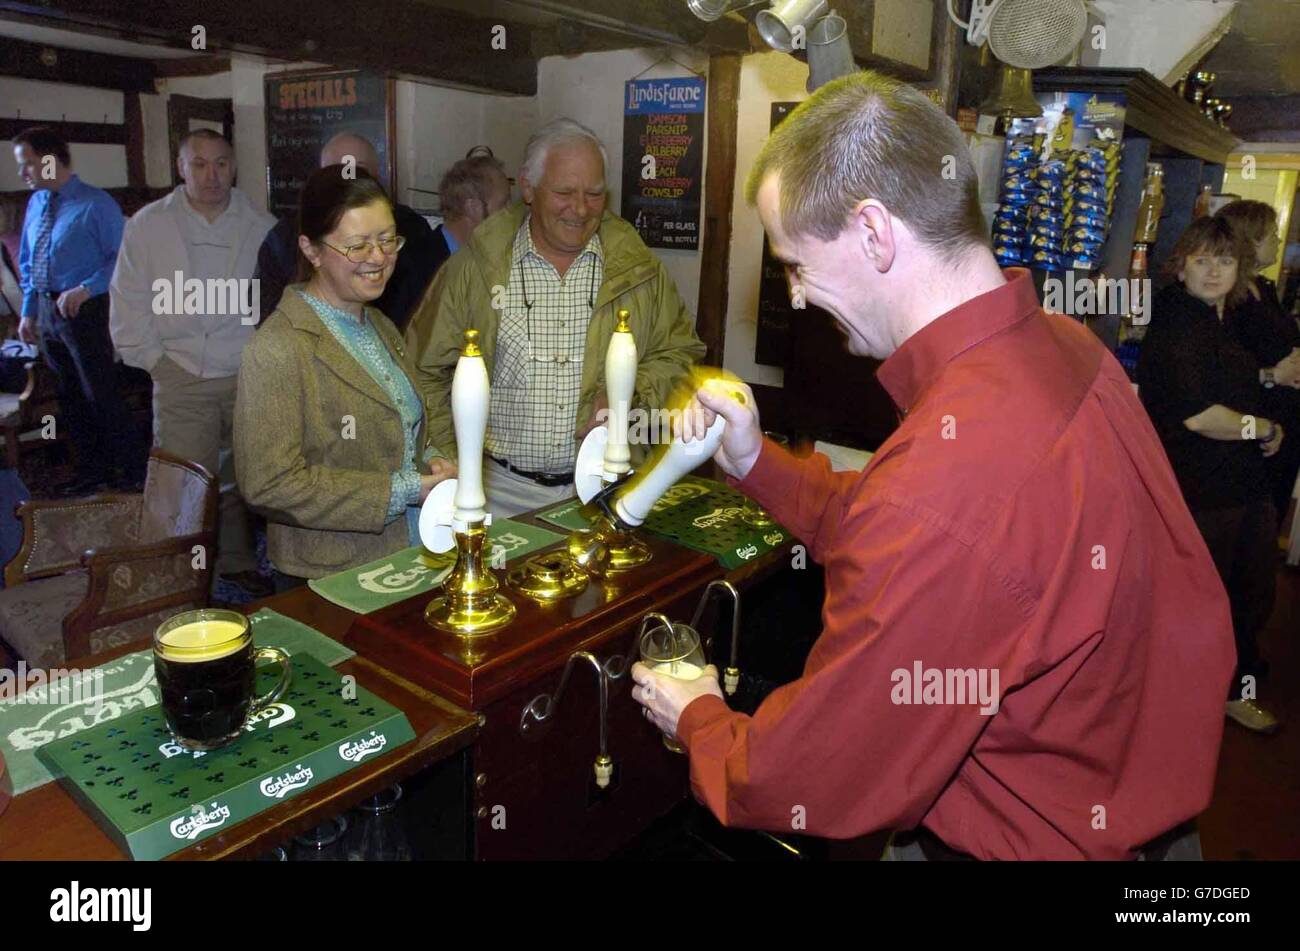 Landlord Guy Ayres pulls the first pint for customers Malcolm Grant and wife Alison at the The Cat Inn, in Enville, South Staffordshire, as the pub opens its doors on a Sunday for the first time in 300 years. The public house has been shut on a Sunday since a decree by the local landowner in the 18th century. Stock Photo